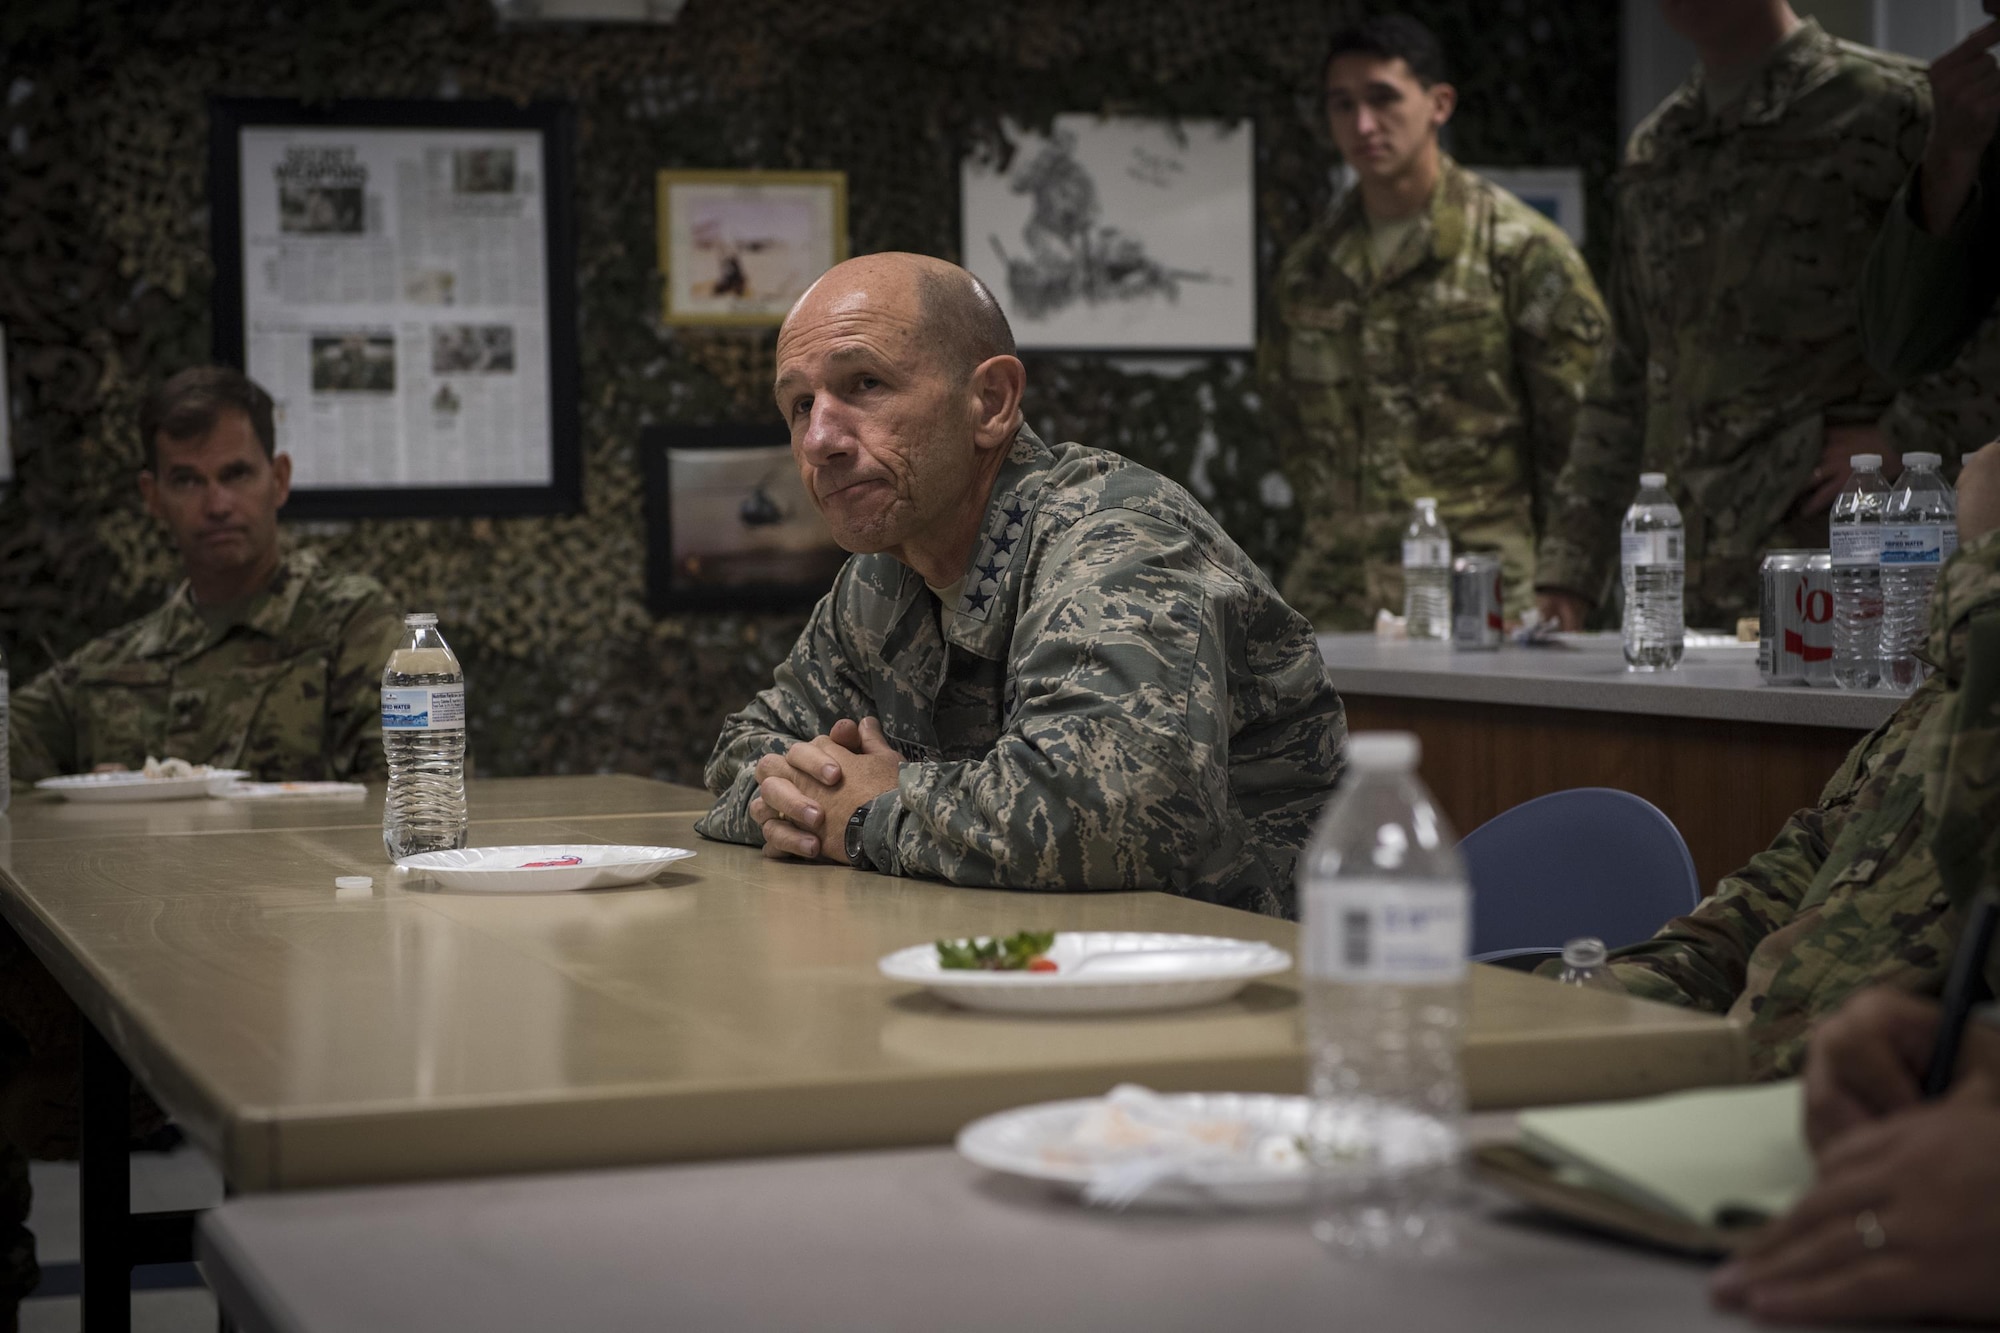 Gen. Mike Holmes, commander of Air Combat Command, center, listens to questions over lunch during his visit to the 20th Air Support Operations Squadron, Oct. 9, 2017, at Fort Drum, N.Y. Holmes visited Airmen belonging to the 14th, 20th and 682d ASOS, and 18th Weather Squadron Detachment 1 during Warfighters Exercise 18-1, to observe Airmen fully engaged in roles they would fill for the Army while downrange. (U.S. Air Force photo by Senior Airman Janiqua P. Robinson)